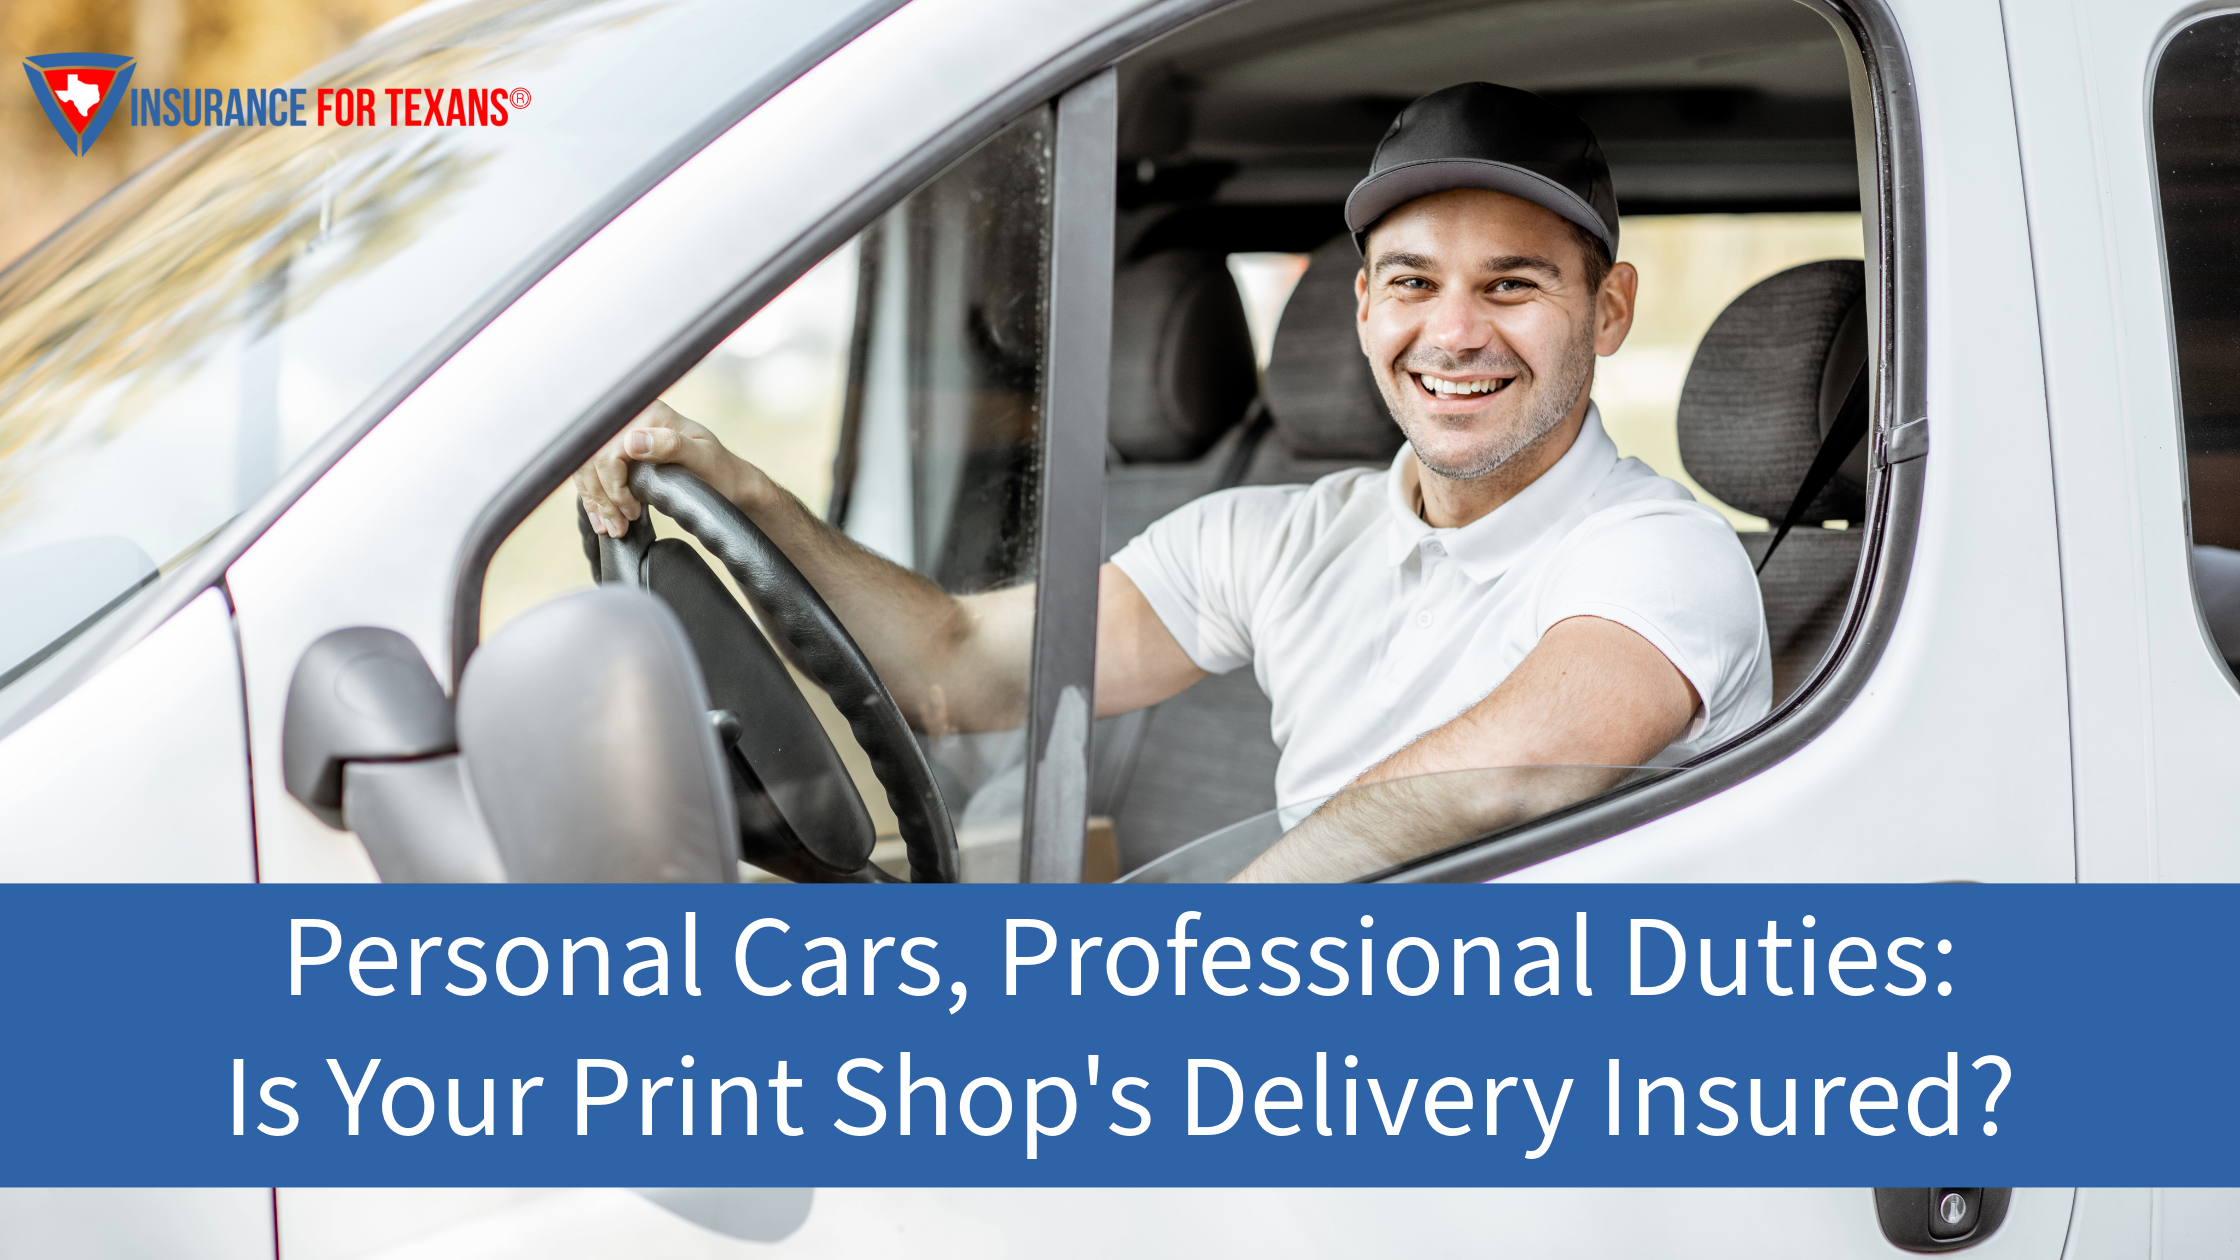 Personal Cars, Professional Duties: Is Your Print Shop's Delivery Insured?